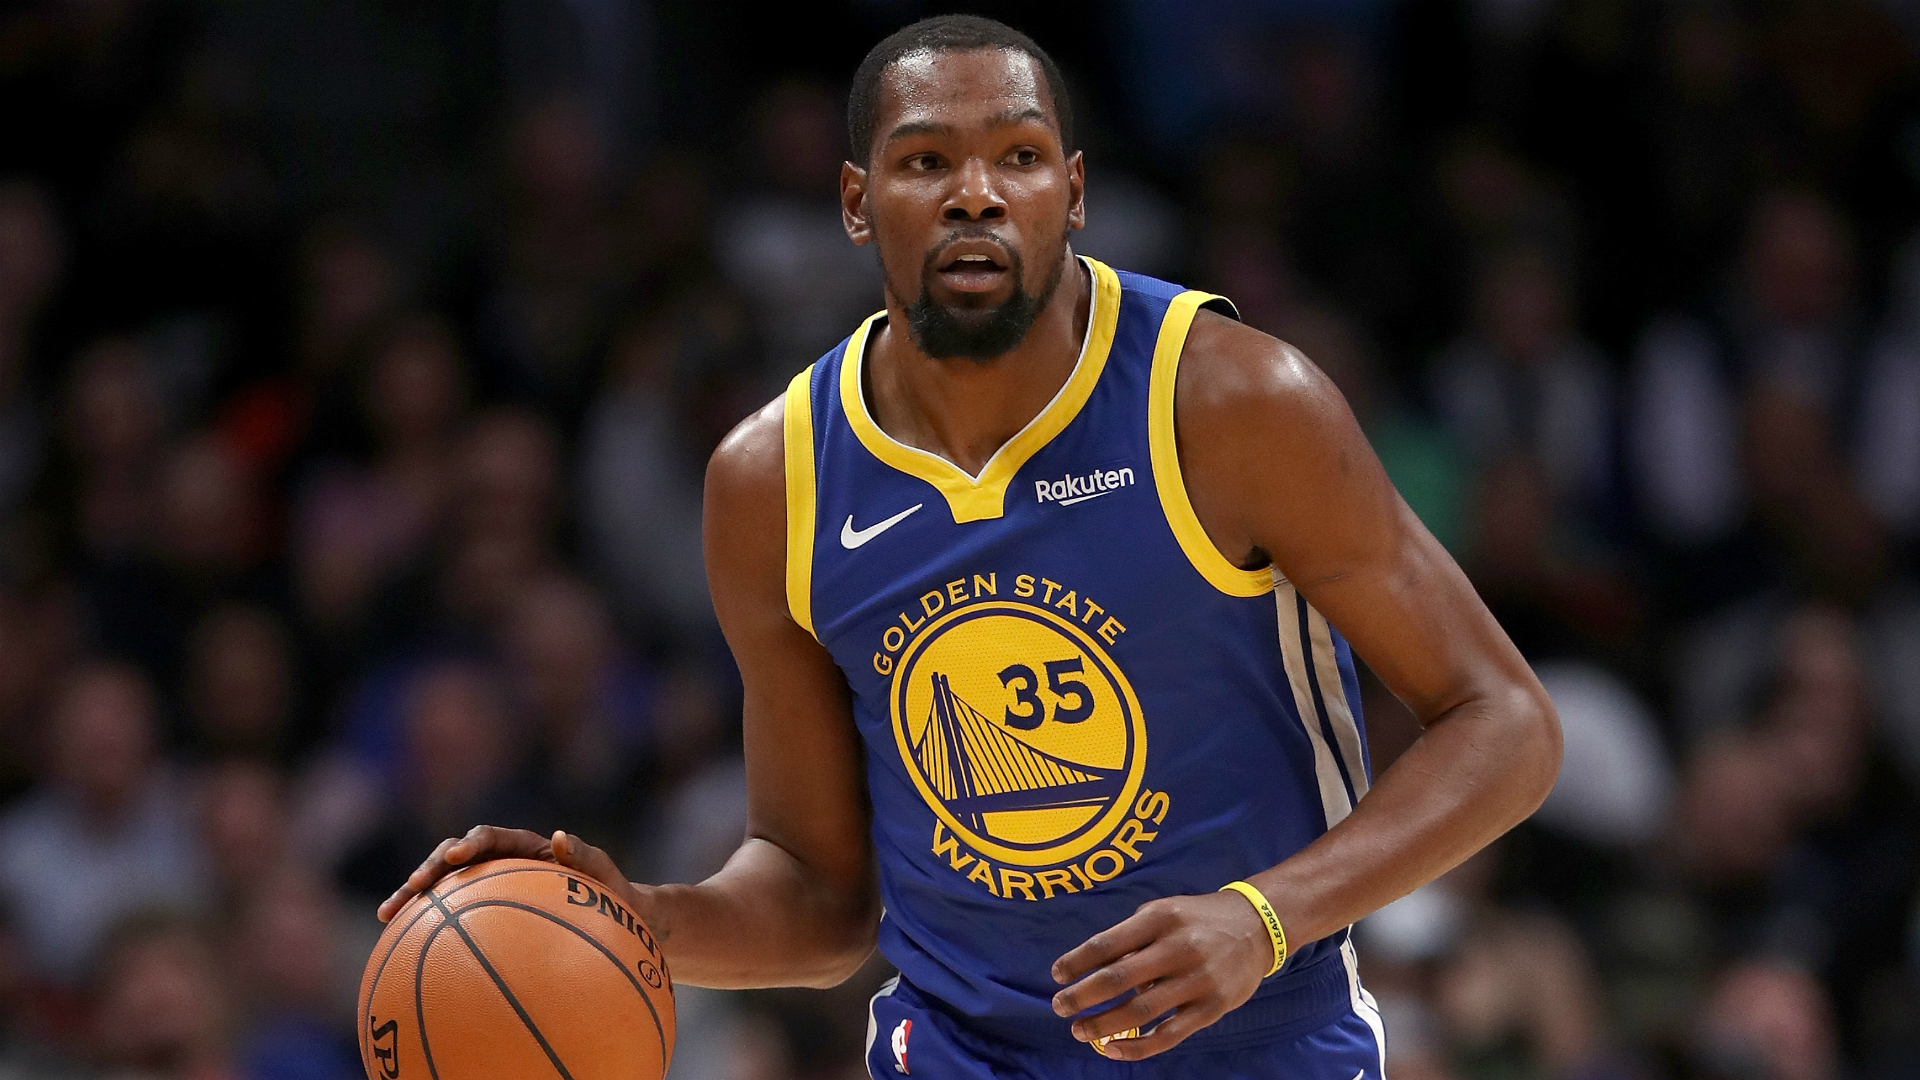 Kevin Durant dismissed suggestions the Golden State Warriors pressured him to play against the Toronto Raptors.